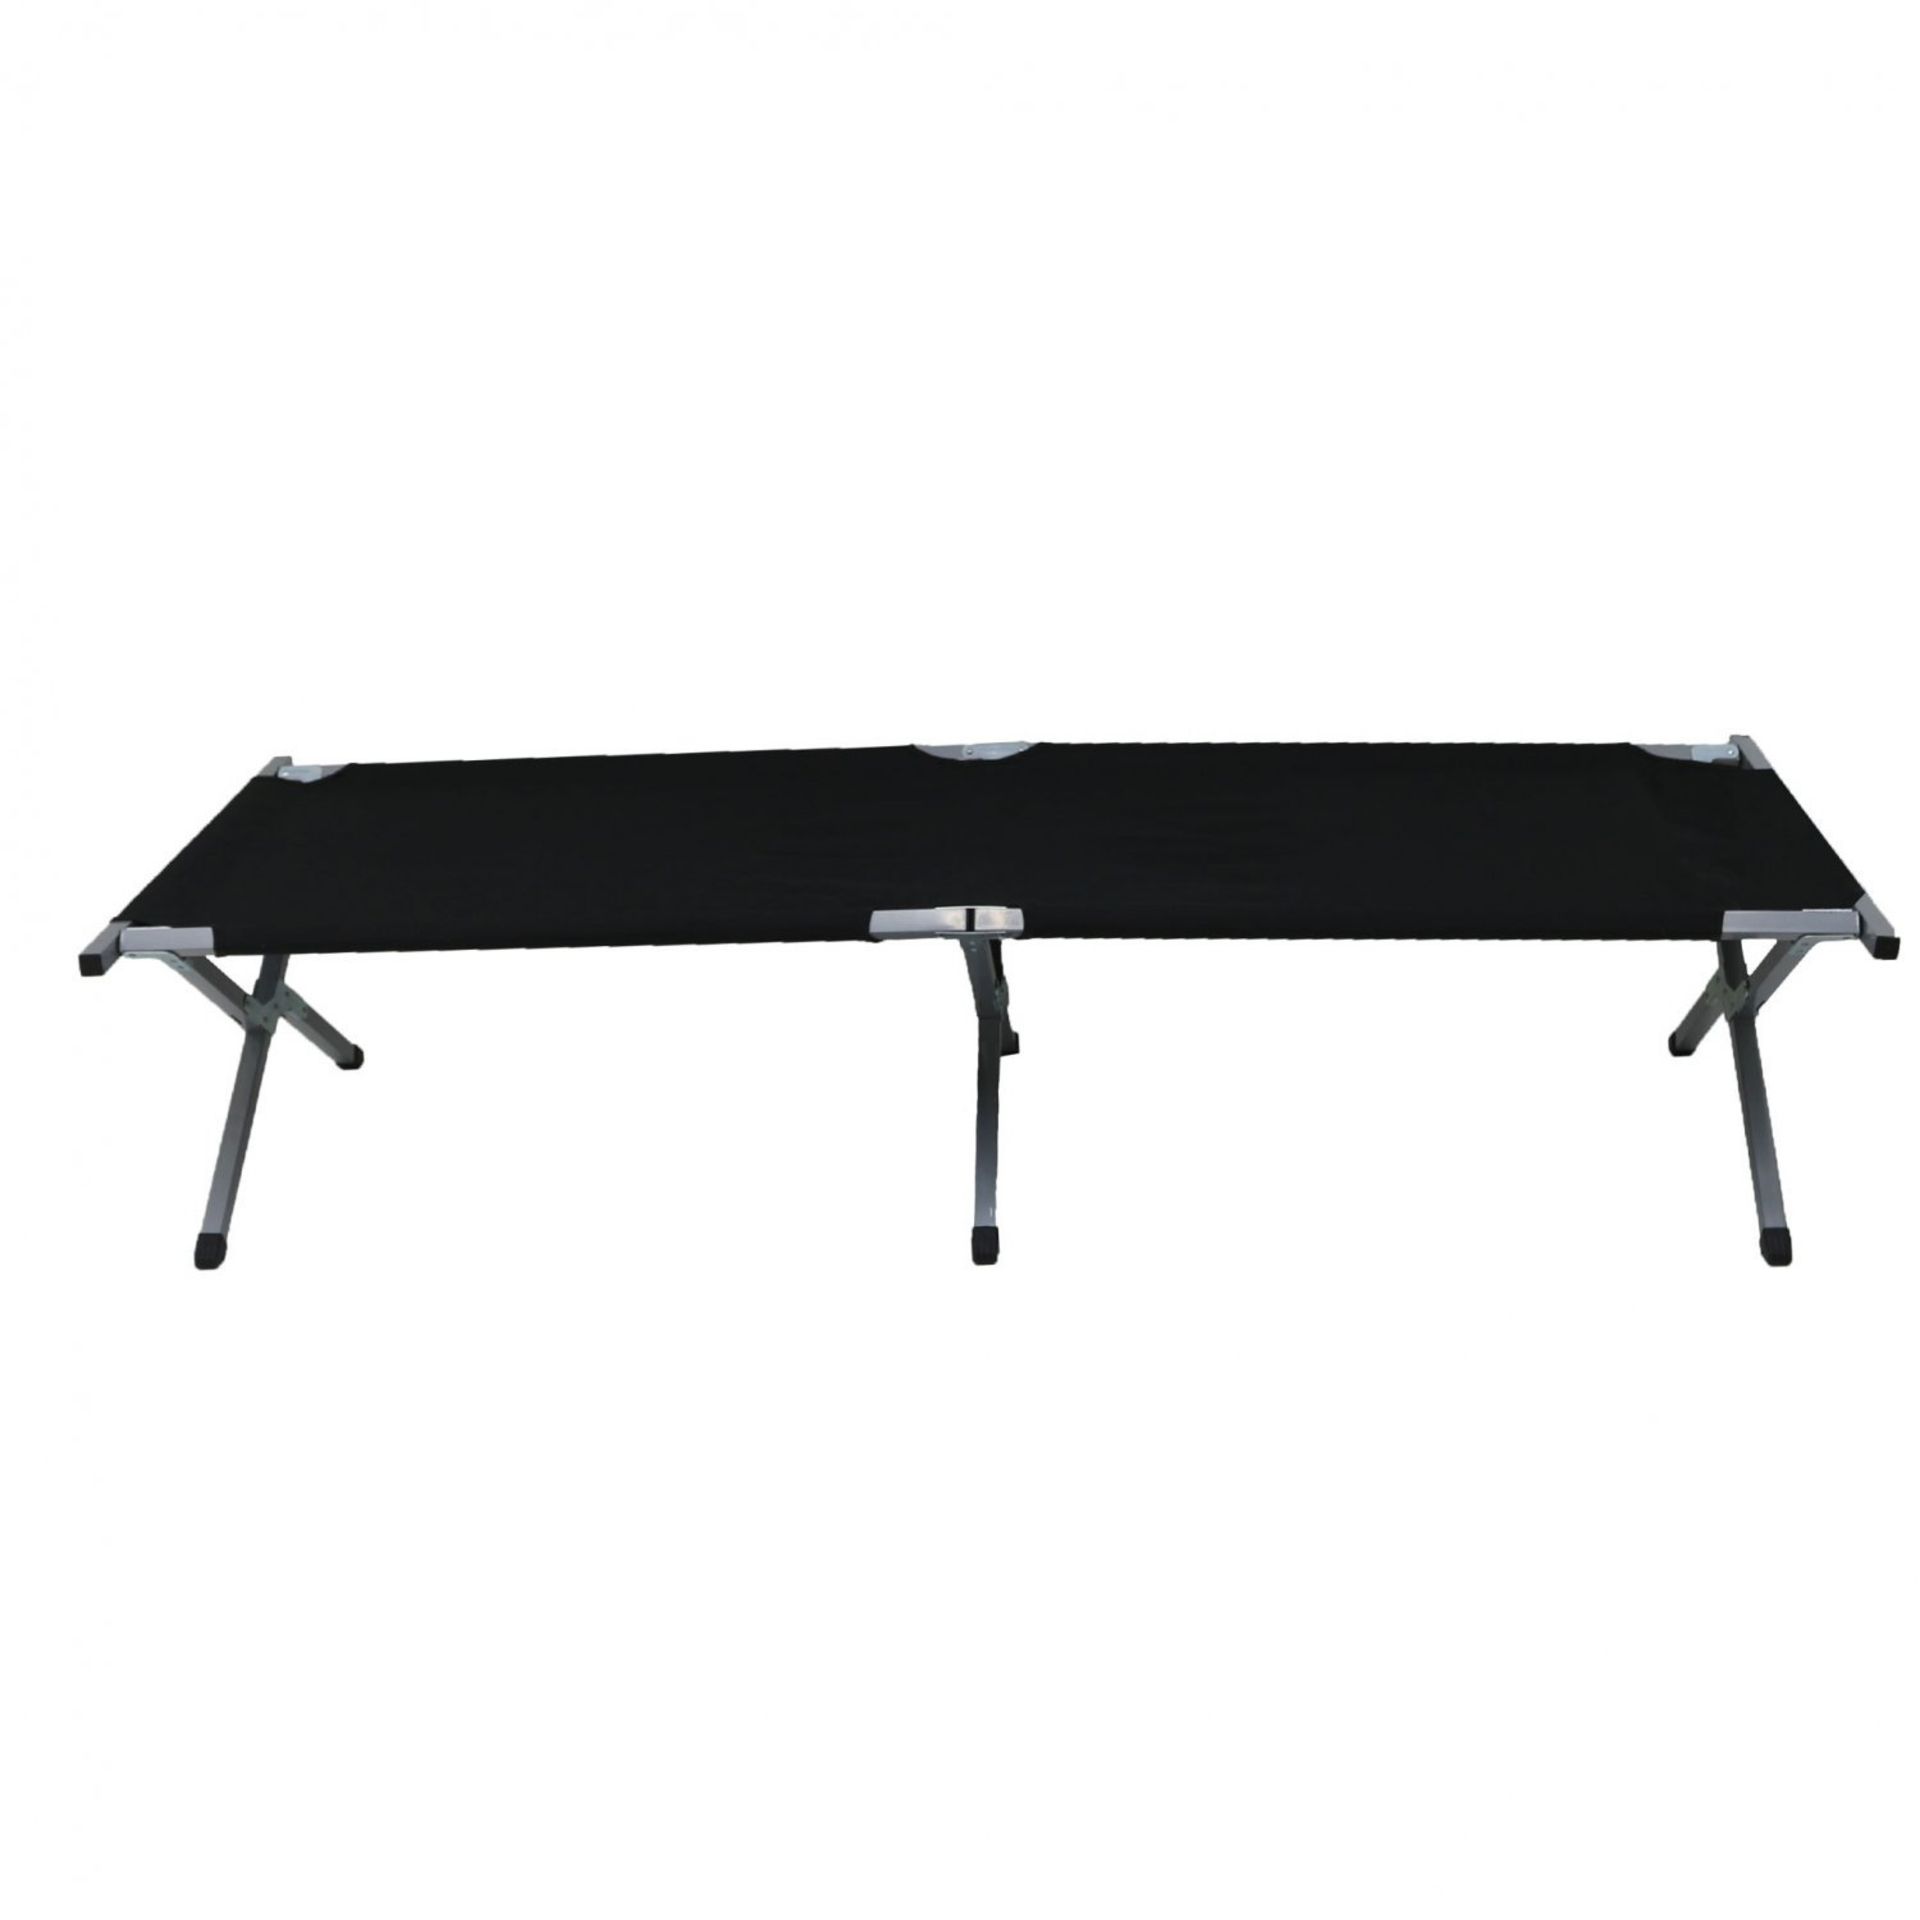 (SK151) 3m Aluminium Folding Wallpaper Pasting Decorating Table The pasting table is ideal... - Image 2 of 2